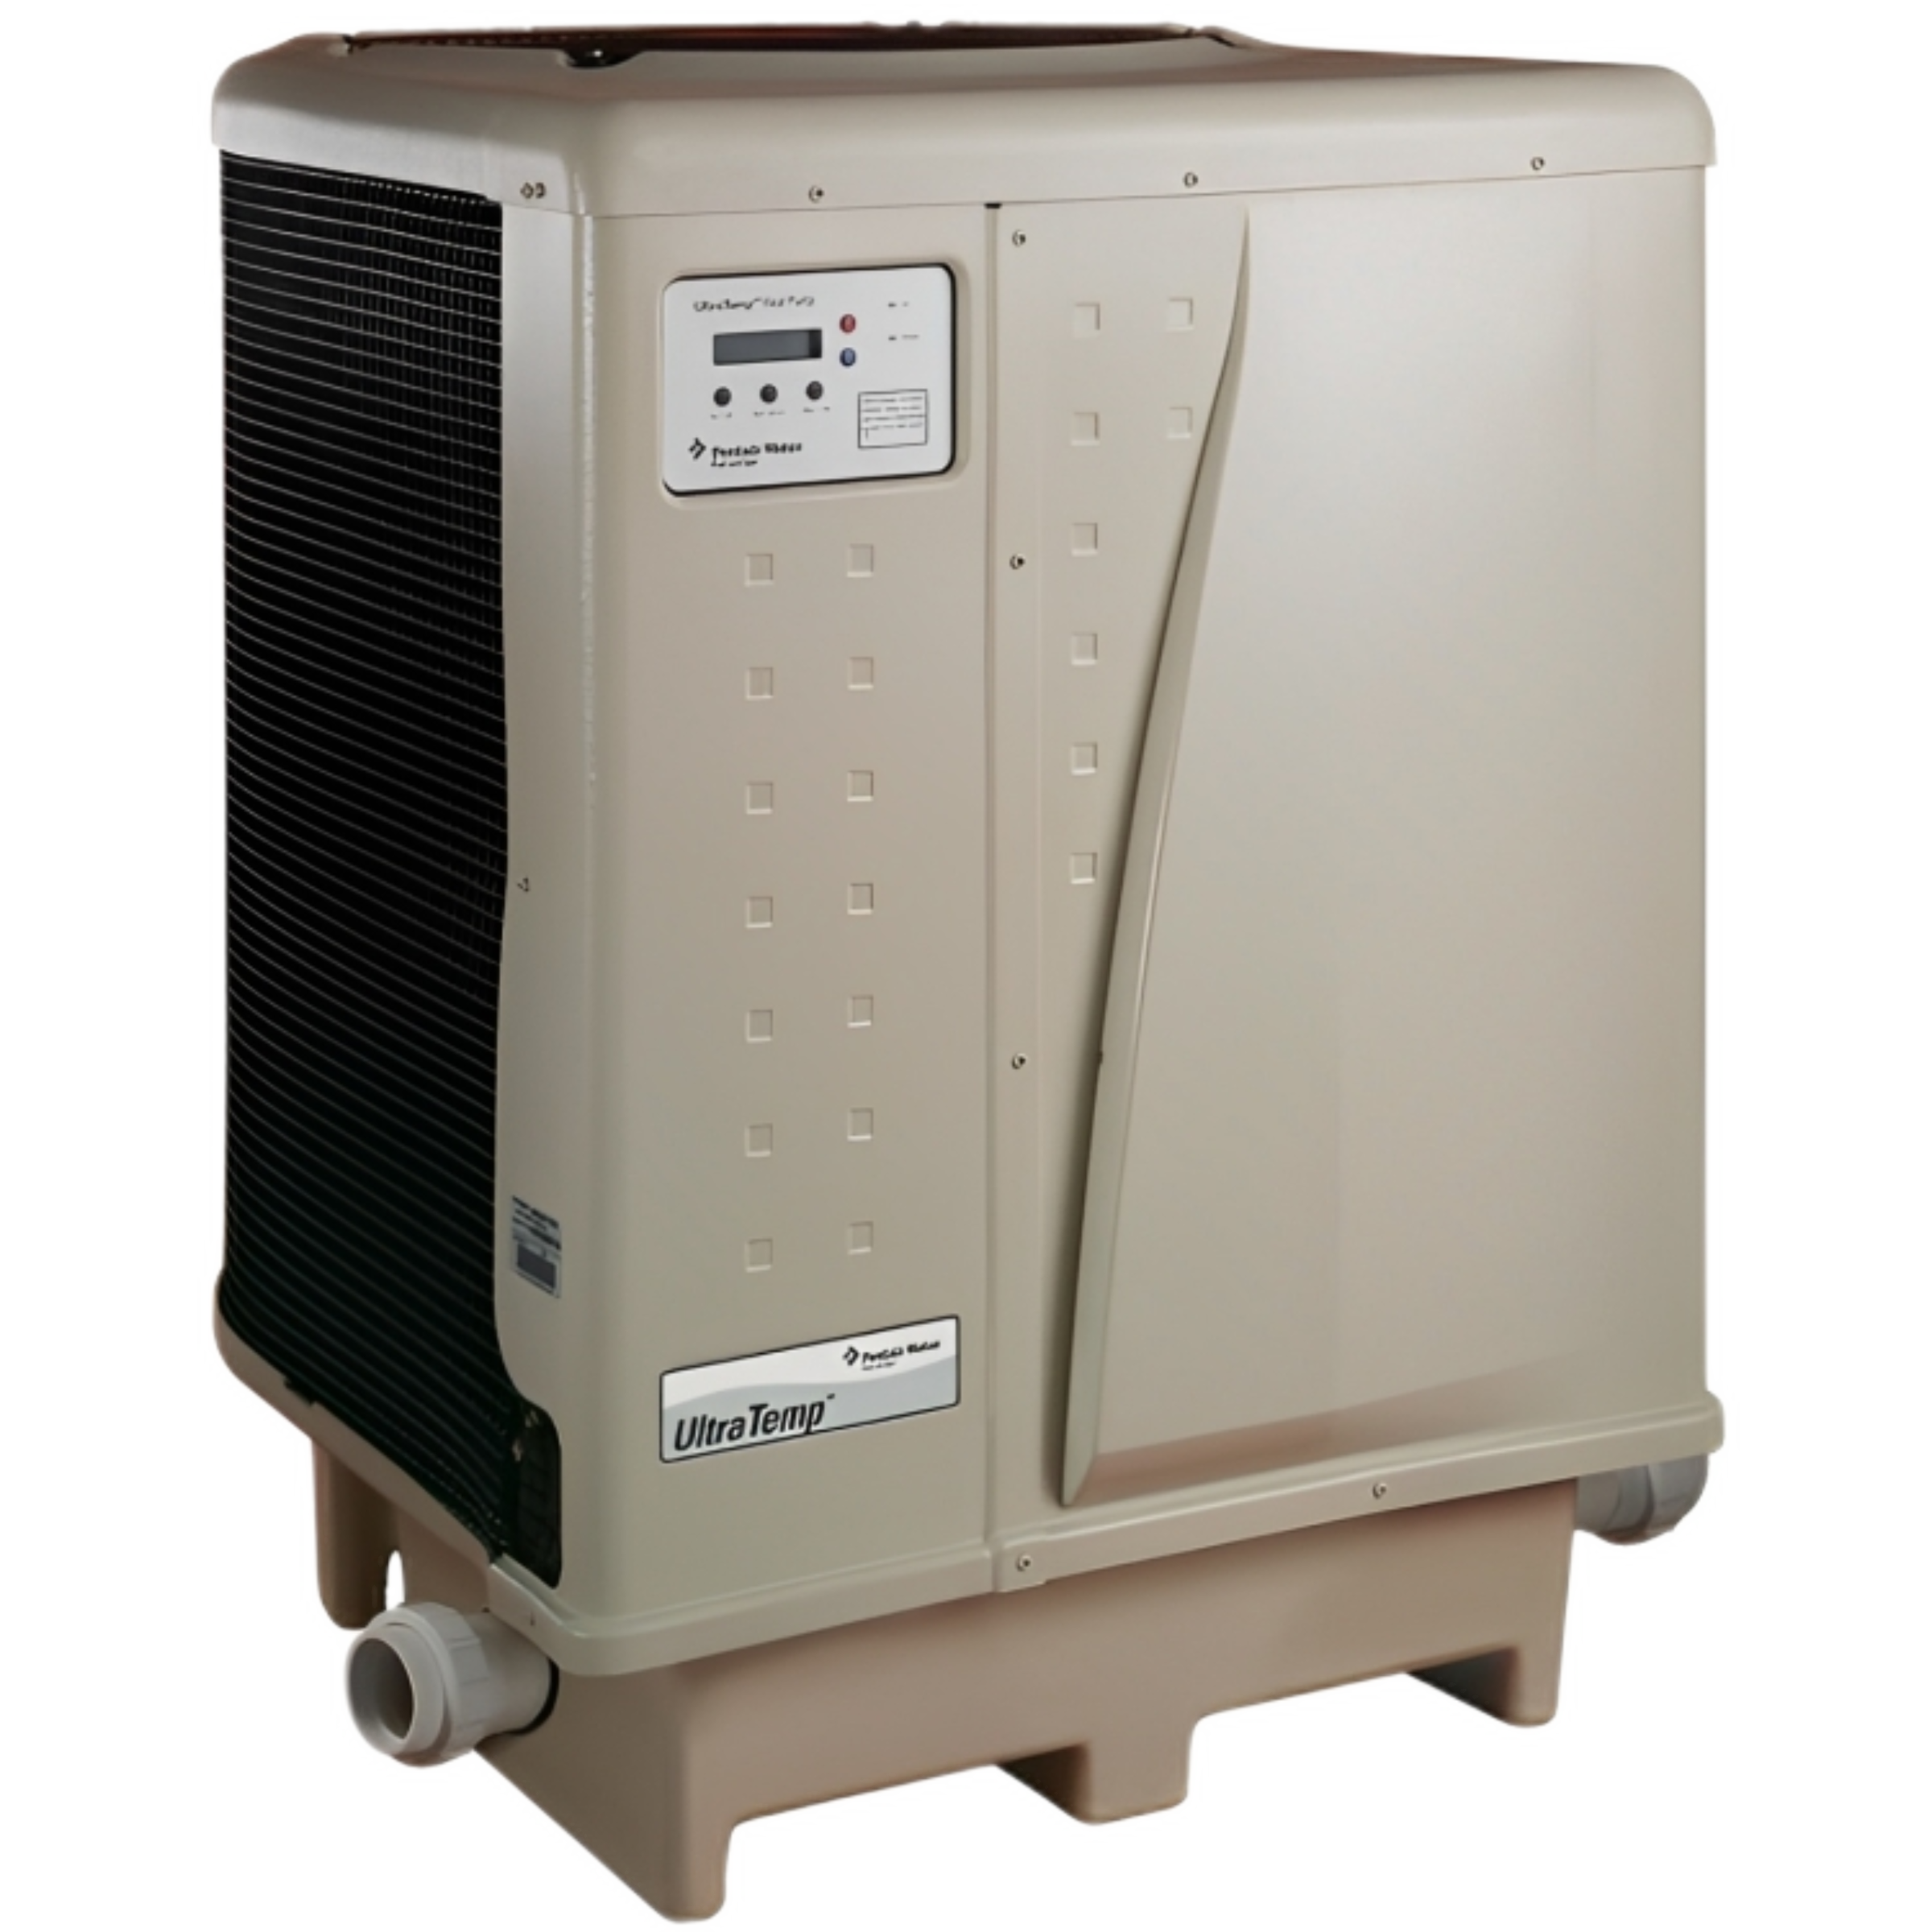 460934 PENTAIR UltraTemp 140 High Performance Pool Heat Pump, Color: Almond, 
SIMPLY THE MOST ECONOMICAL WAY TO HEAT POOLS AND SPAS